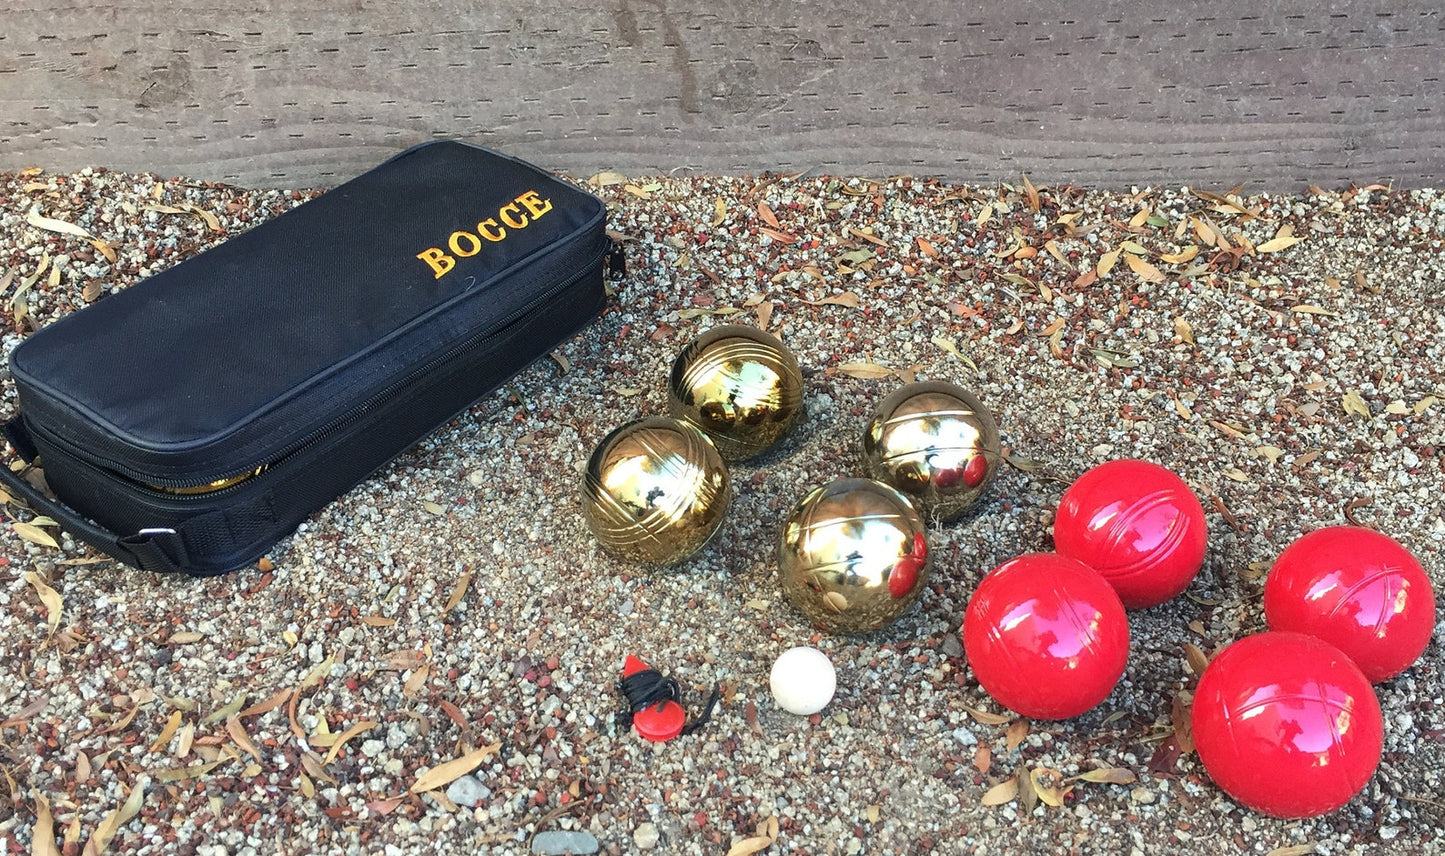 73mm Metal Bocce/Petanque Set with 8 Red and Gold Balls and Black Bag